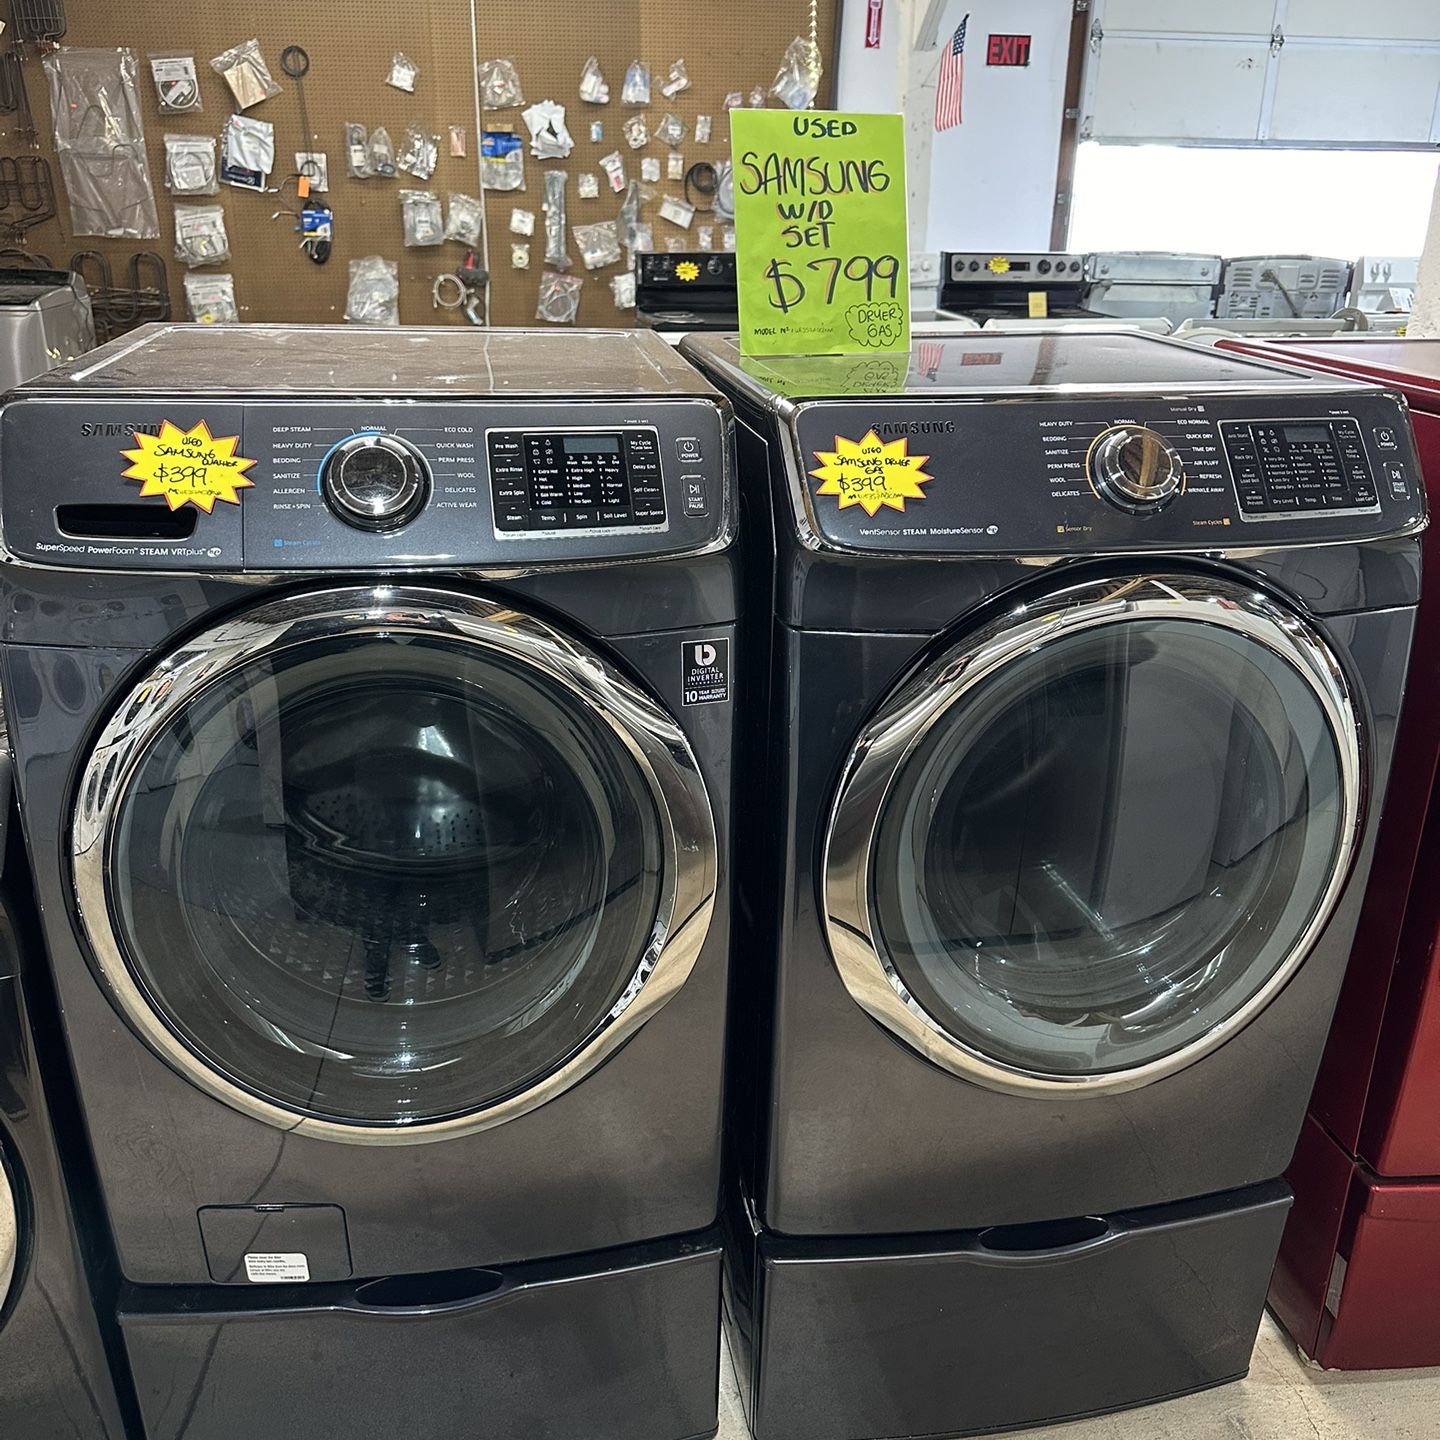 GAS SAMSUNG WASHER AND DRYER